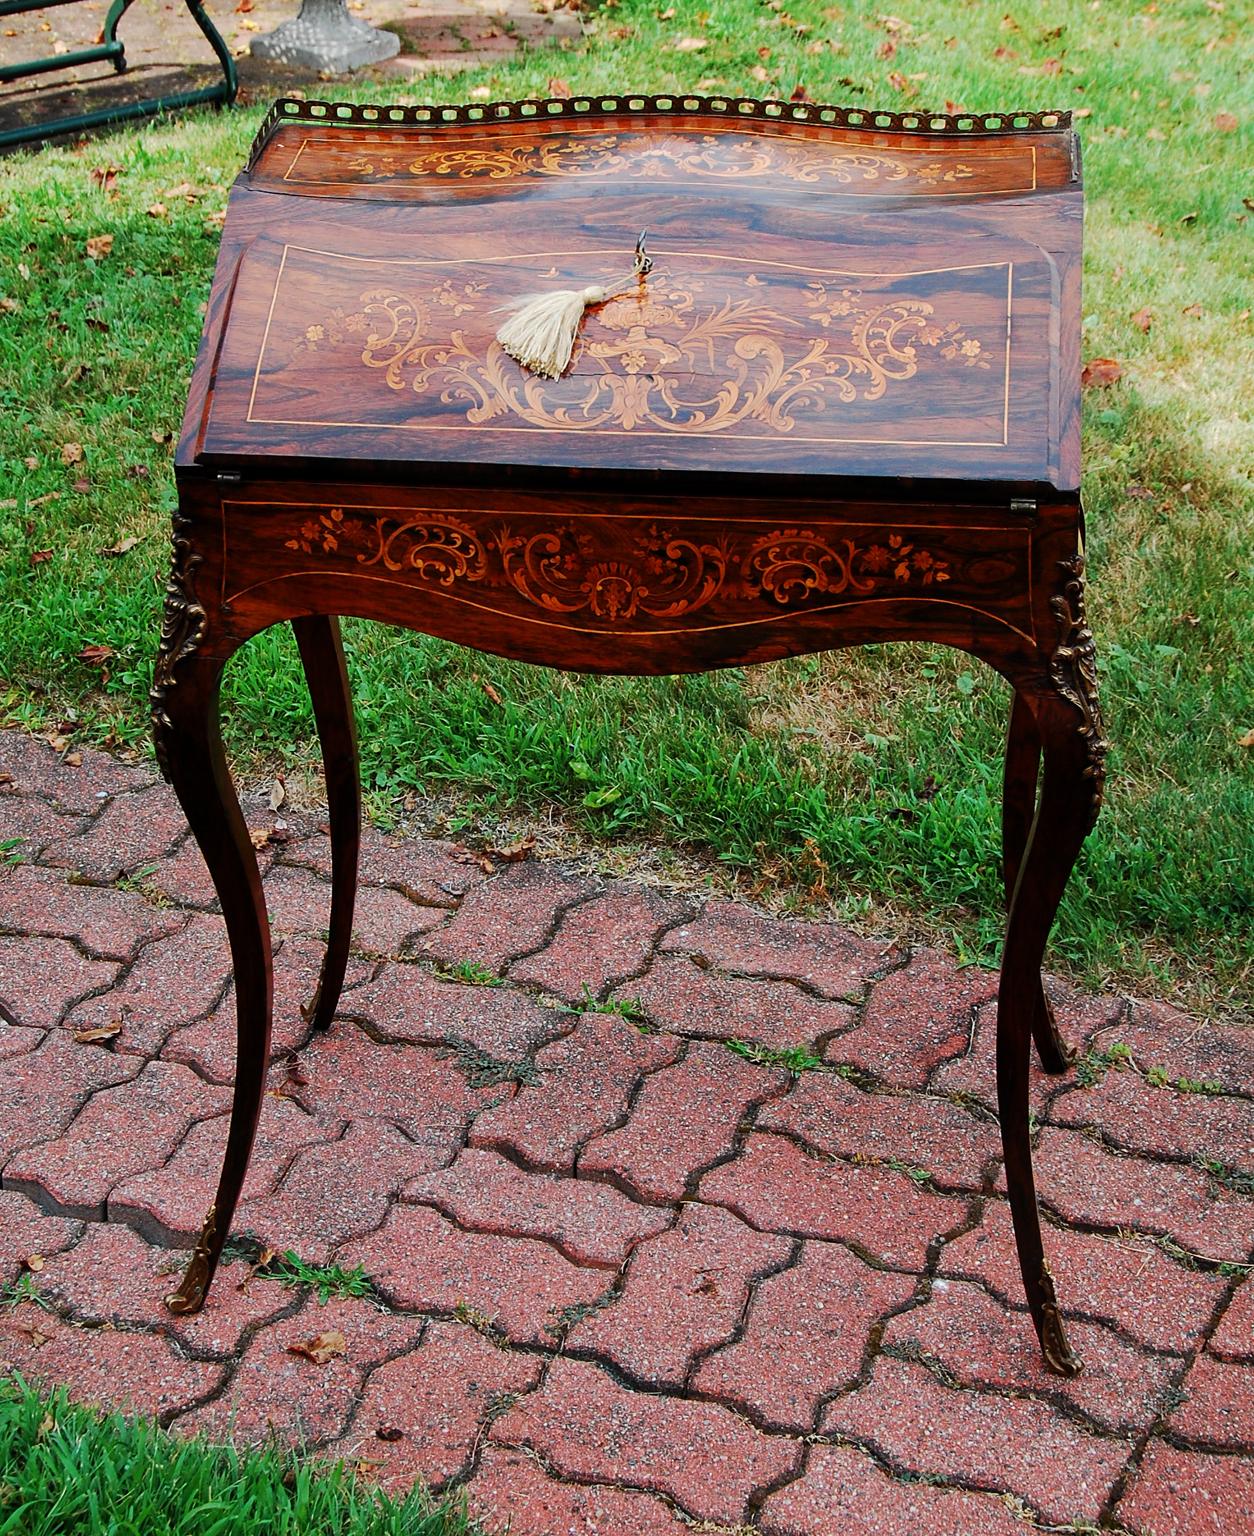 French Louis XVI style fall front serpentine lady's writing desk in rosewood with elaborate marquetry inlay in boxwood and satinwood. This diminutive, bombay, elegant writing desk has delicate cabriole legs with ormolu mounts and a brass gallery to